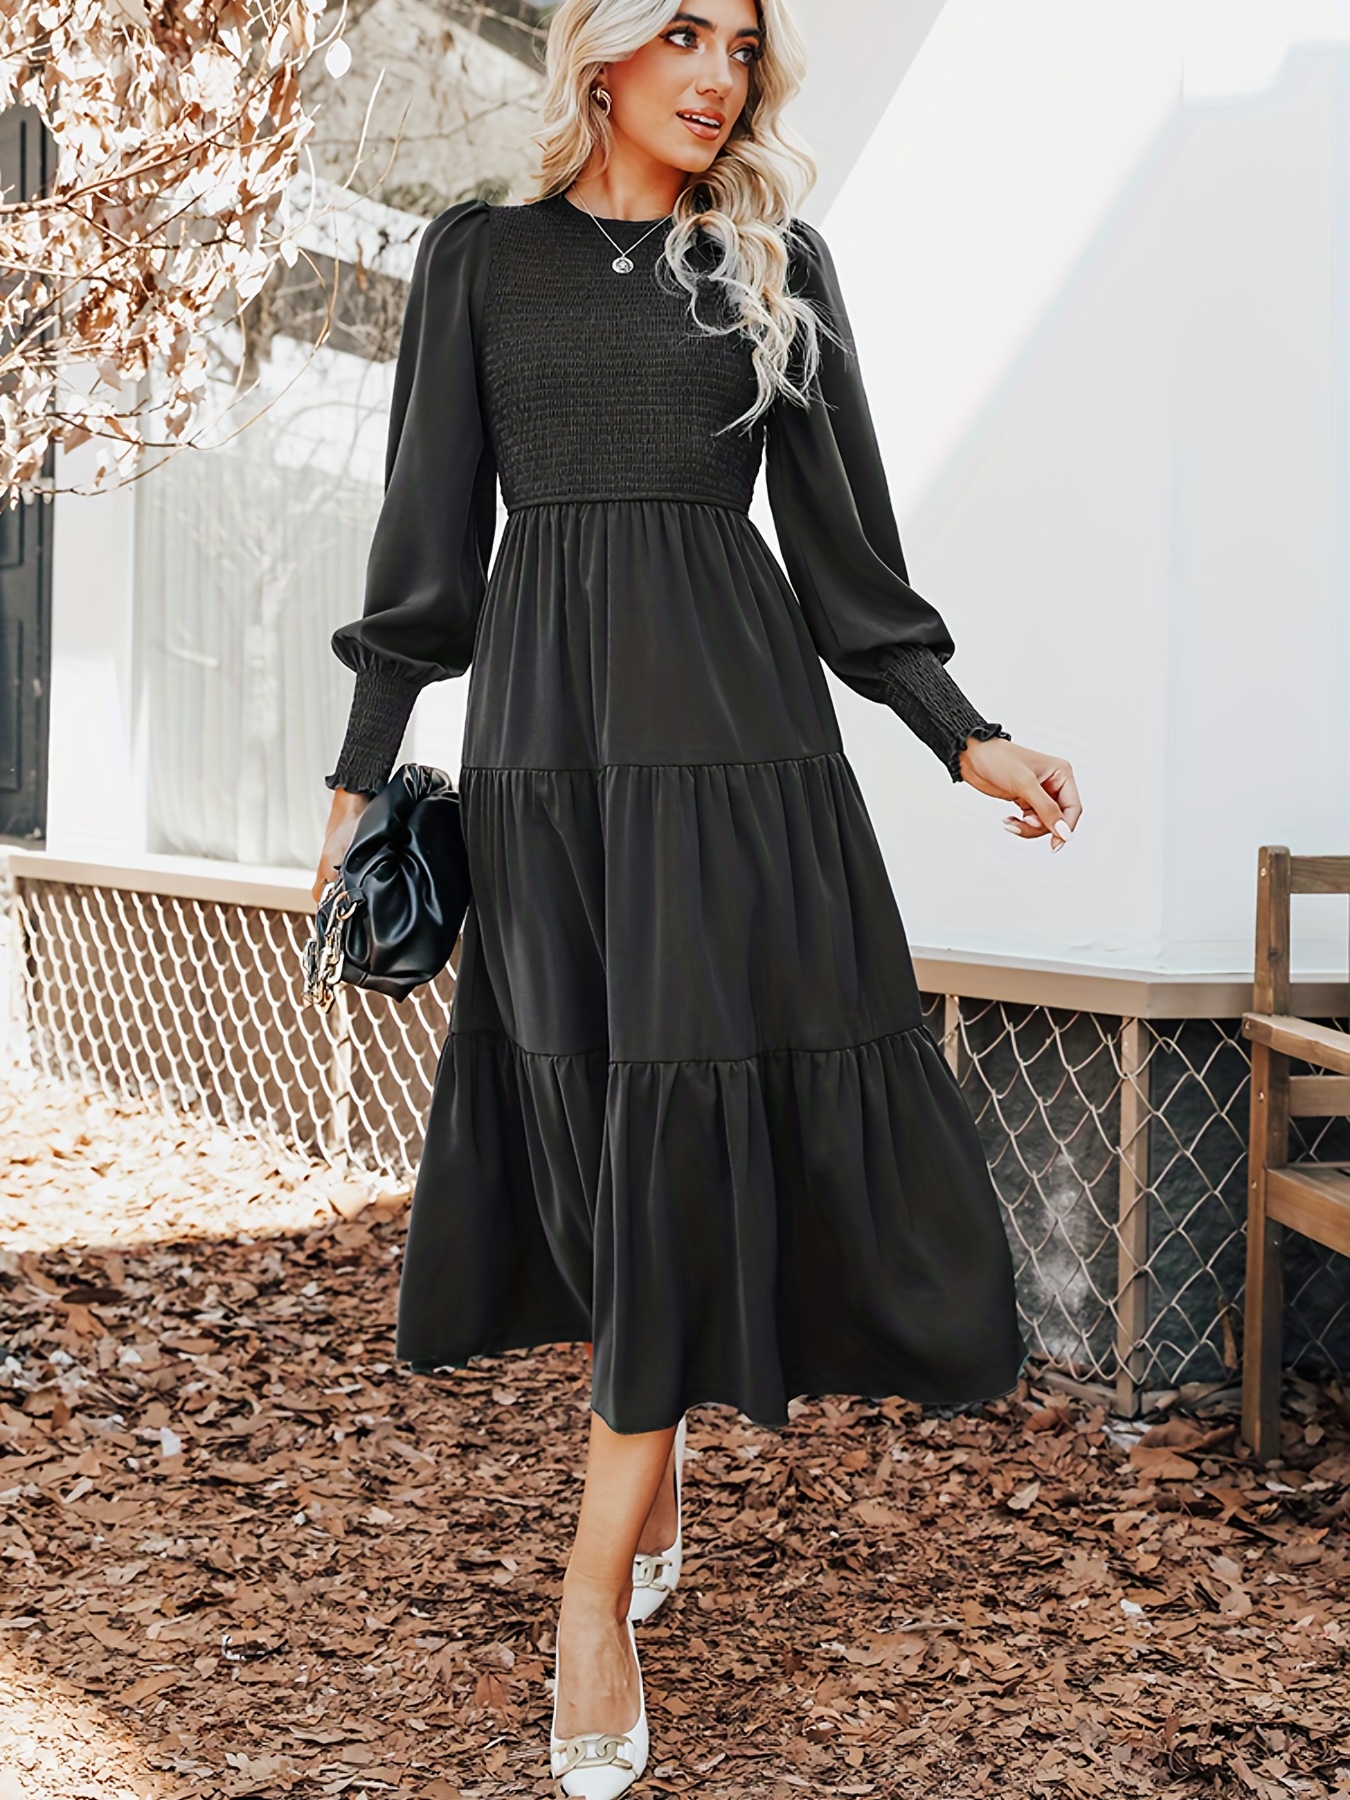 Long Sleeve Dresses, Dresses With Sleeves